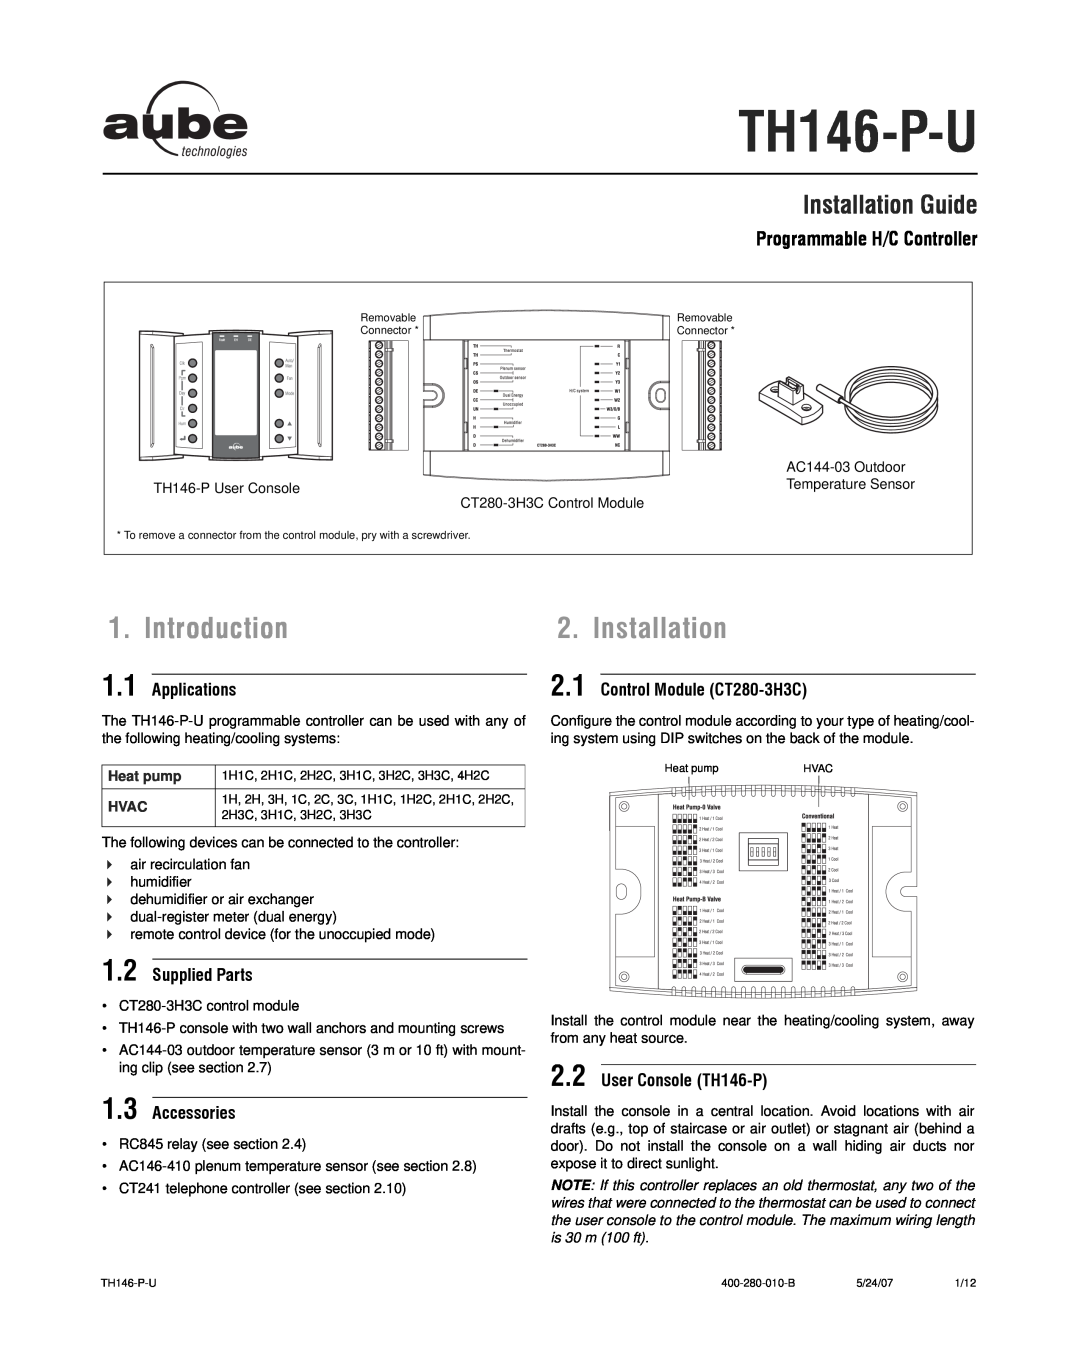 Aube Technologies TH146-P-U manual Introduction, Installation Guide, Programmable H/C Controller, Applications, Hvac 